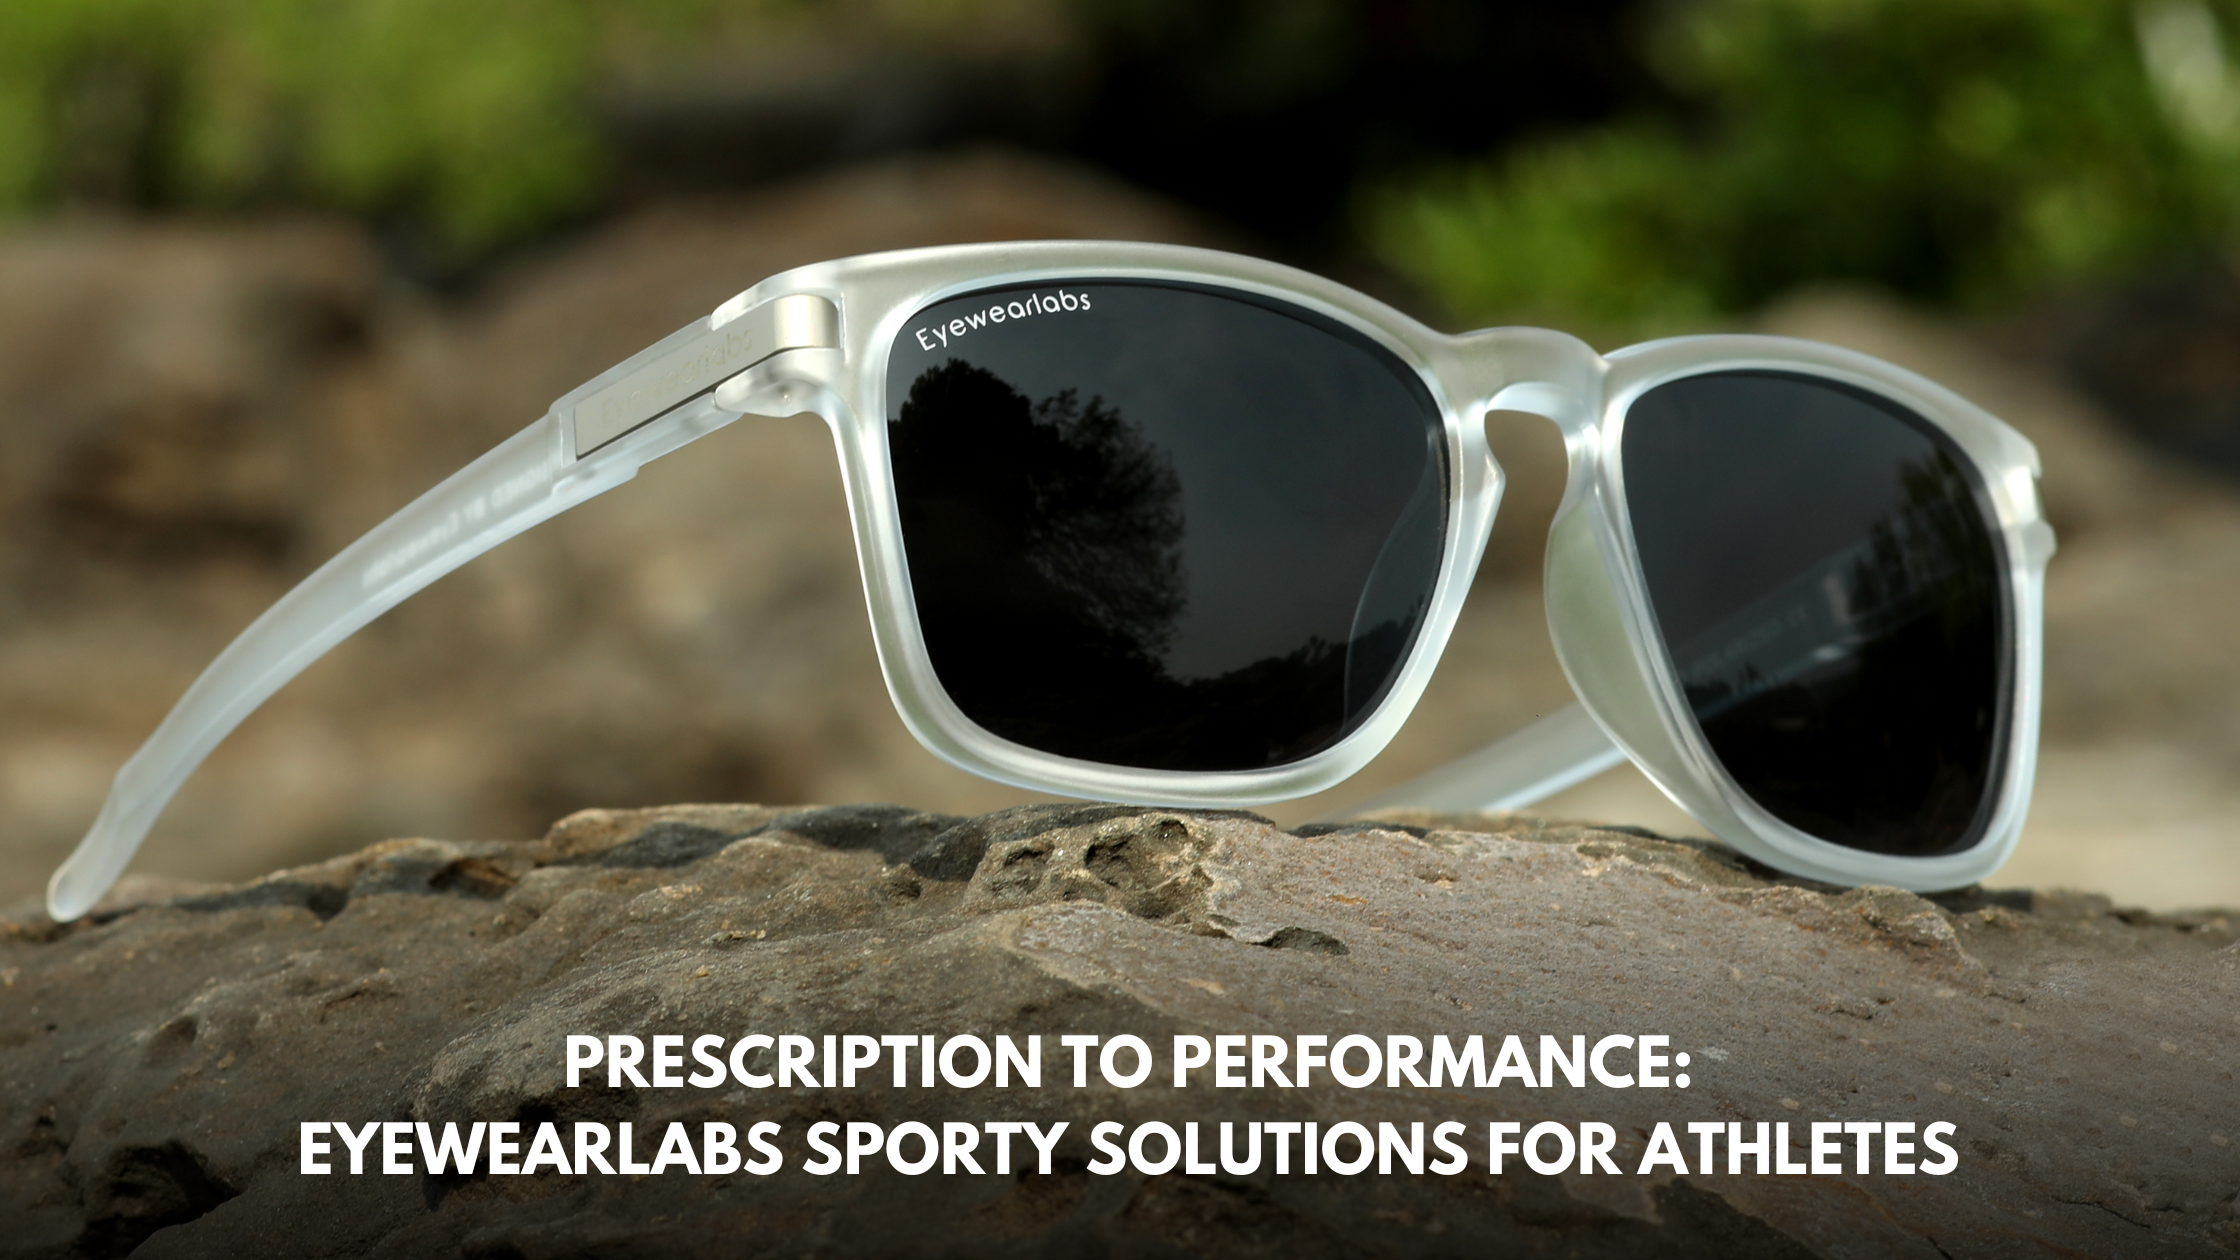 Prescription to Performance: Eyewearlabs Sporty Solutions for Athletes